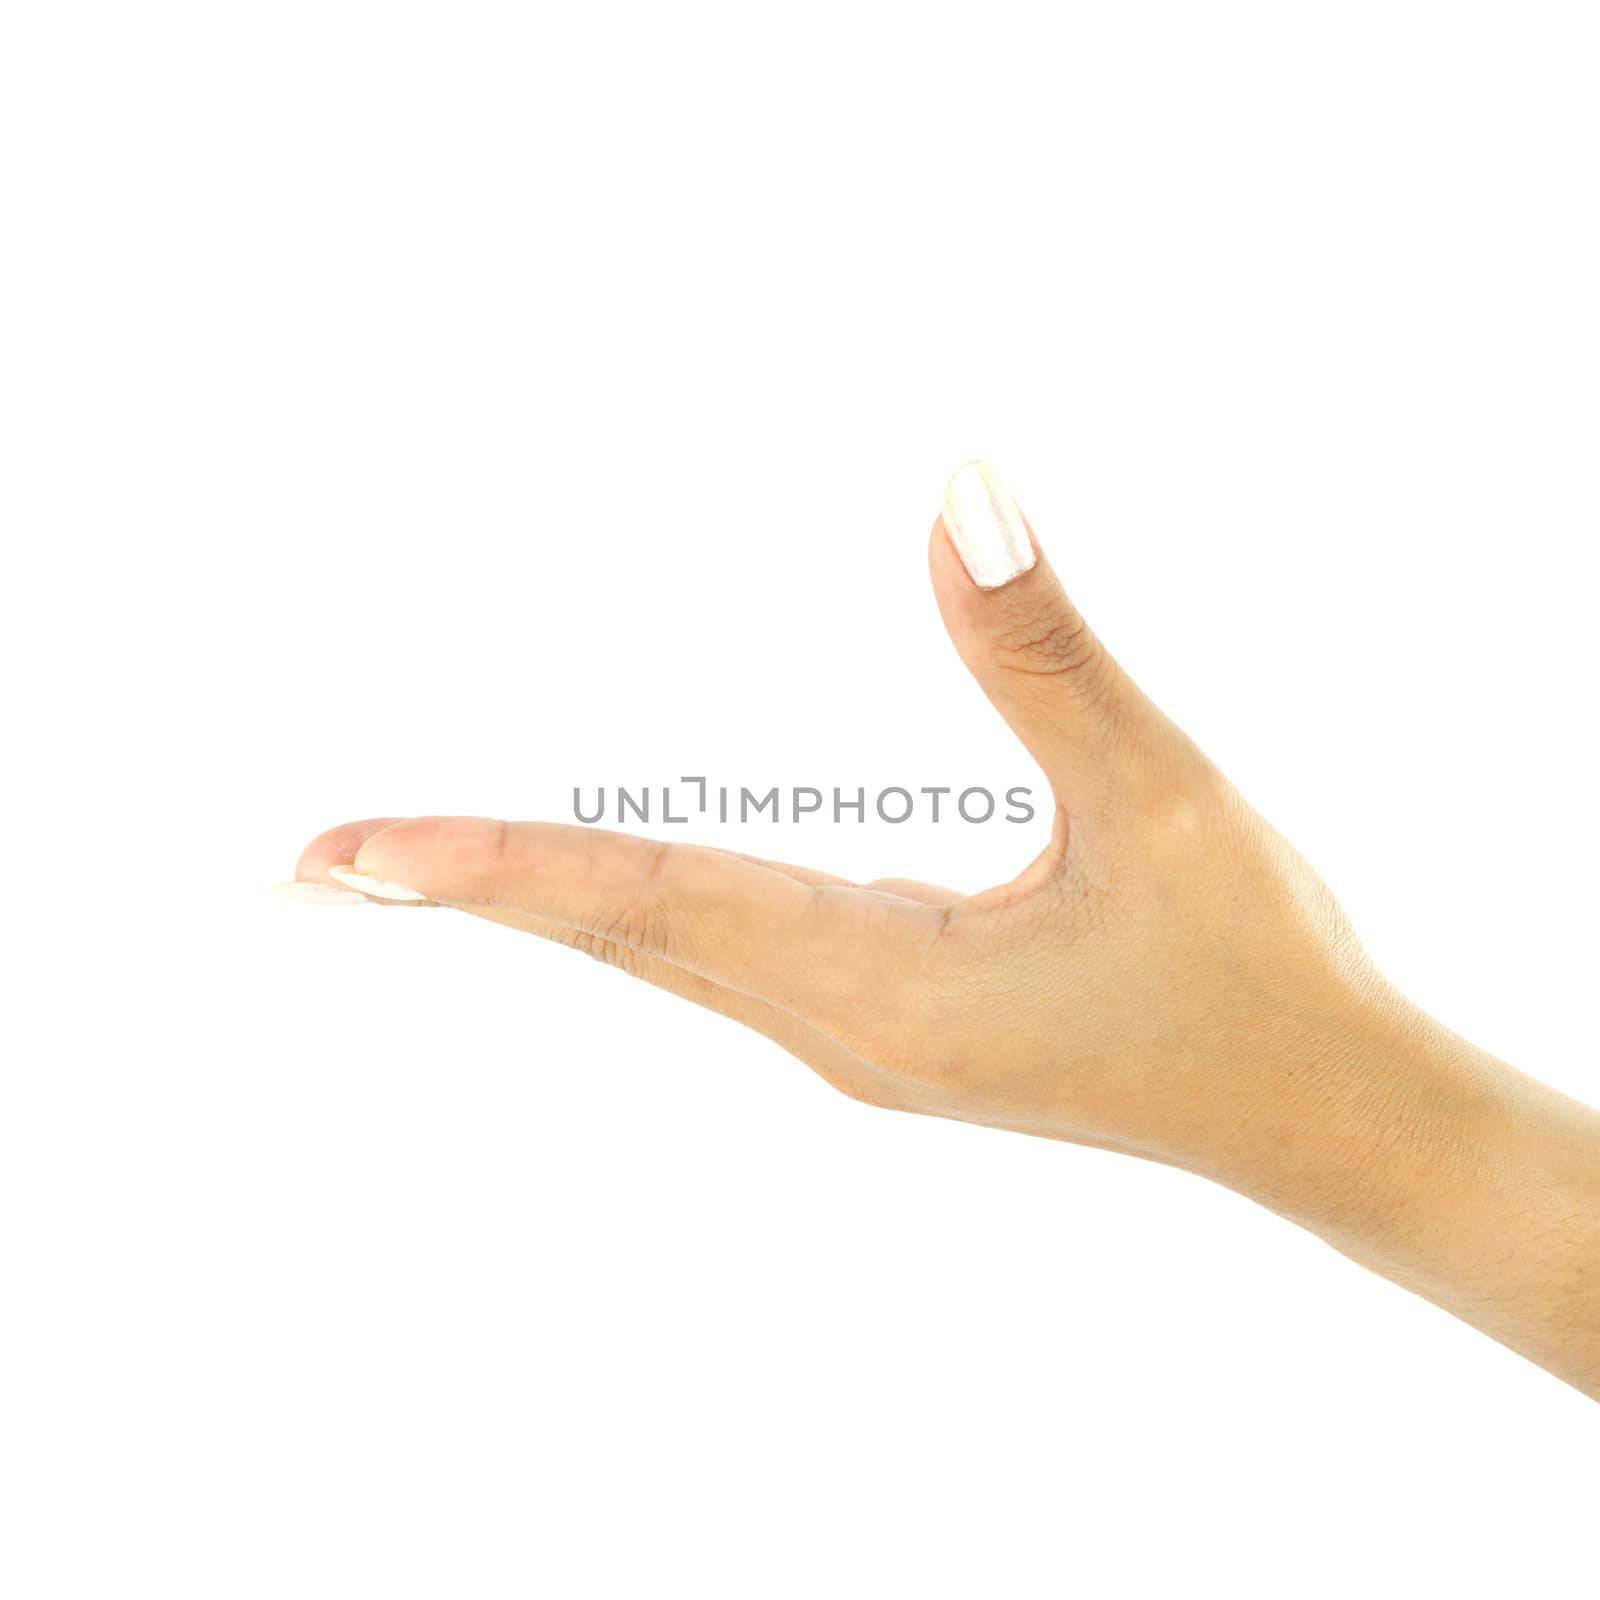 Empty hand isolated on white background